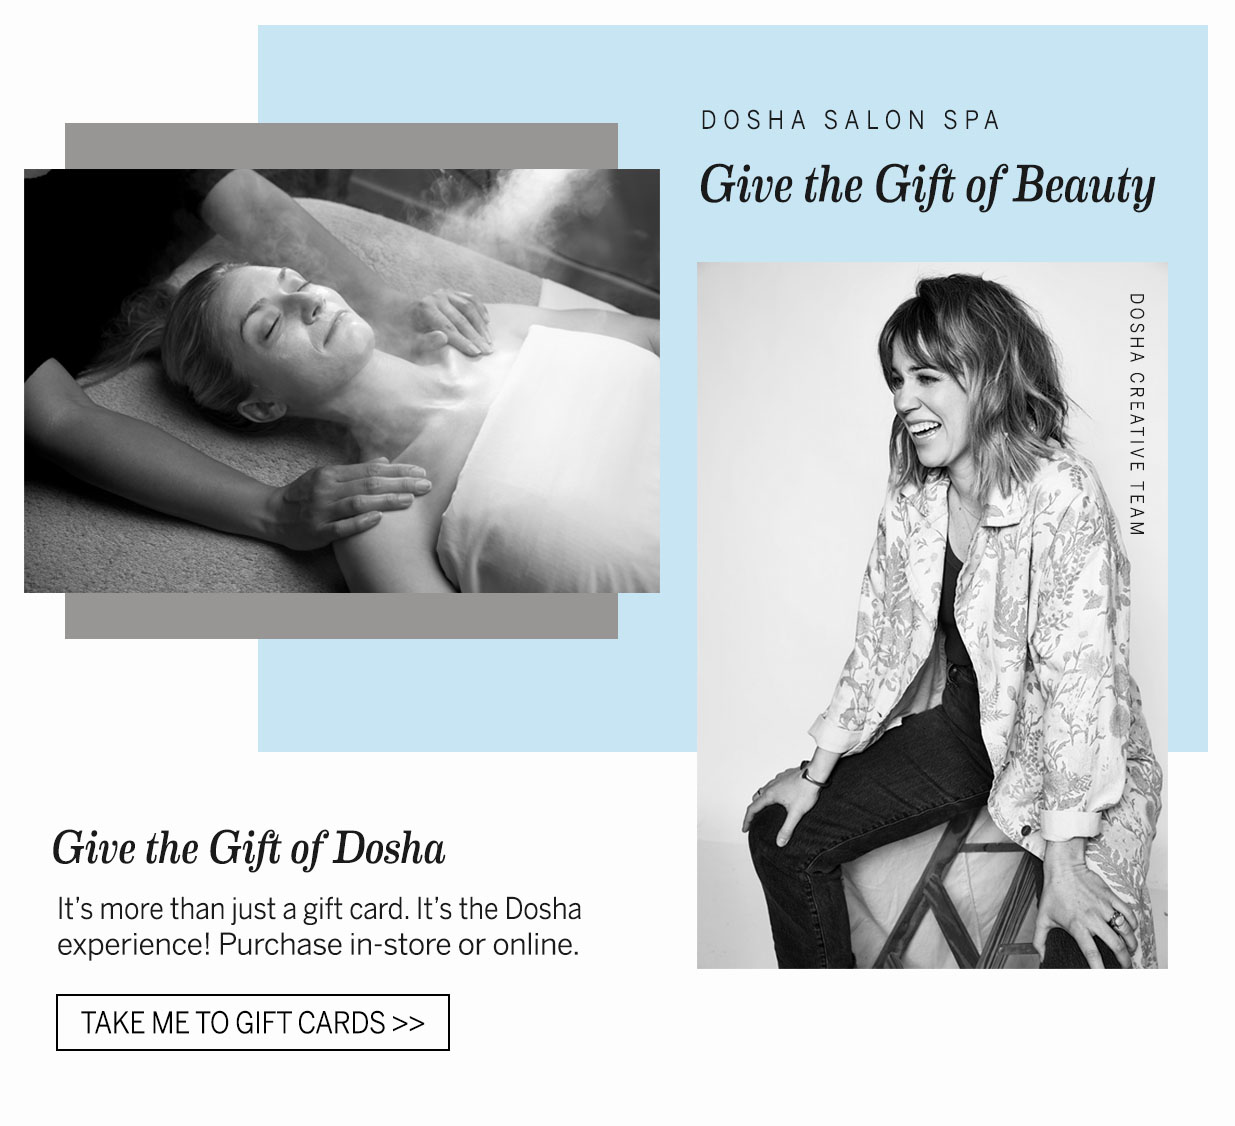 Dosha gift Cards with image of a steam facial and a Mom from our Dosha creative team photoshoot